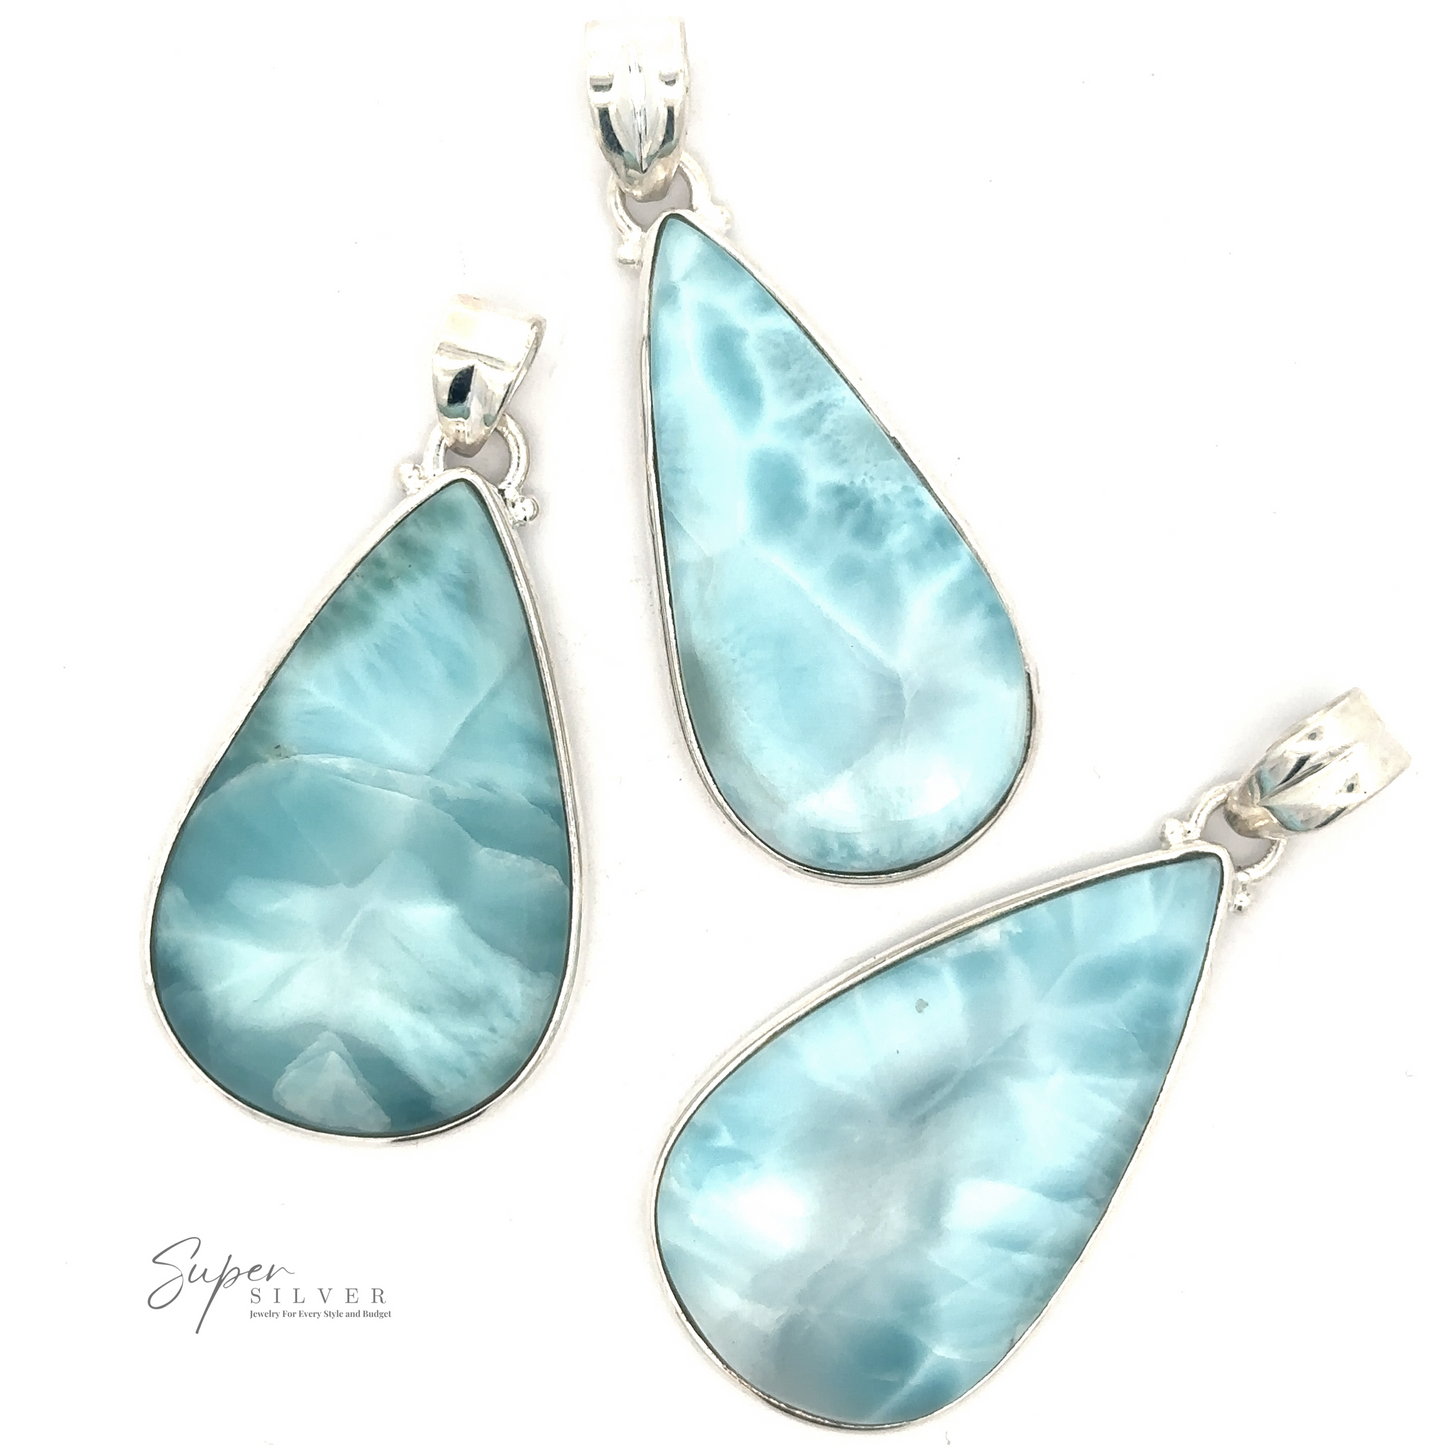 
                  
                    Three Larger Teardrop Larimar Pendants, each set in sterling silver, are displayed on a white background. The pendants feature various shades of blue with natural marbling patterns.
                  
                